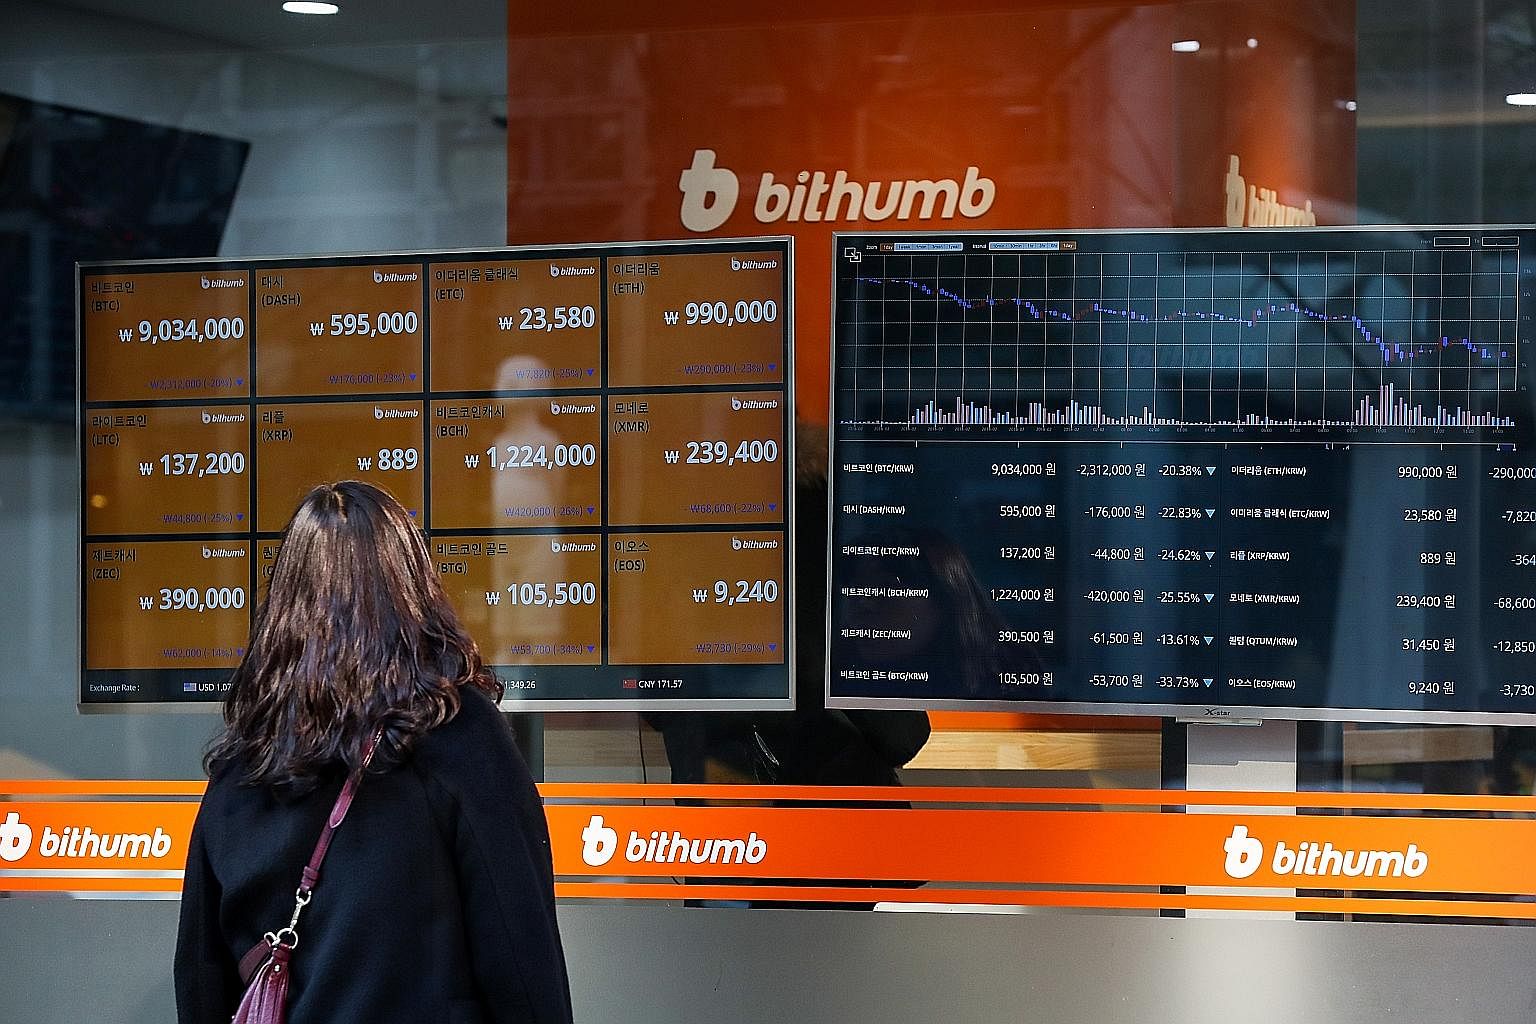 Monitors show prices of virtual currencies at the Bithumb exchange office in Seoul. Cryptocurrencies will not be actual currencies, except for drug dealers and others who cannot use normal forms of payment, says the writer.